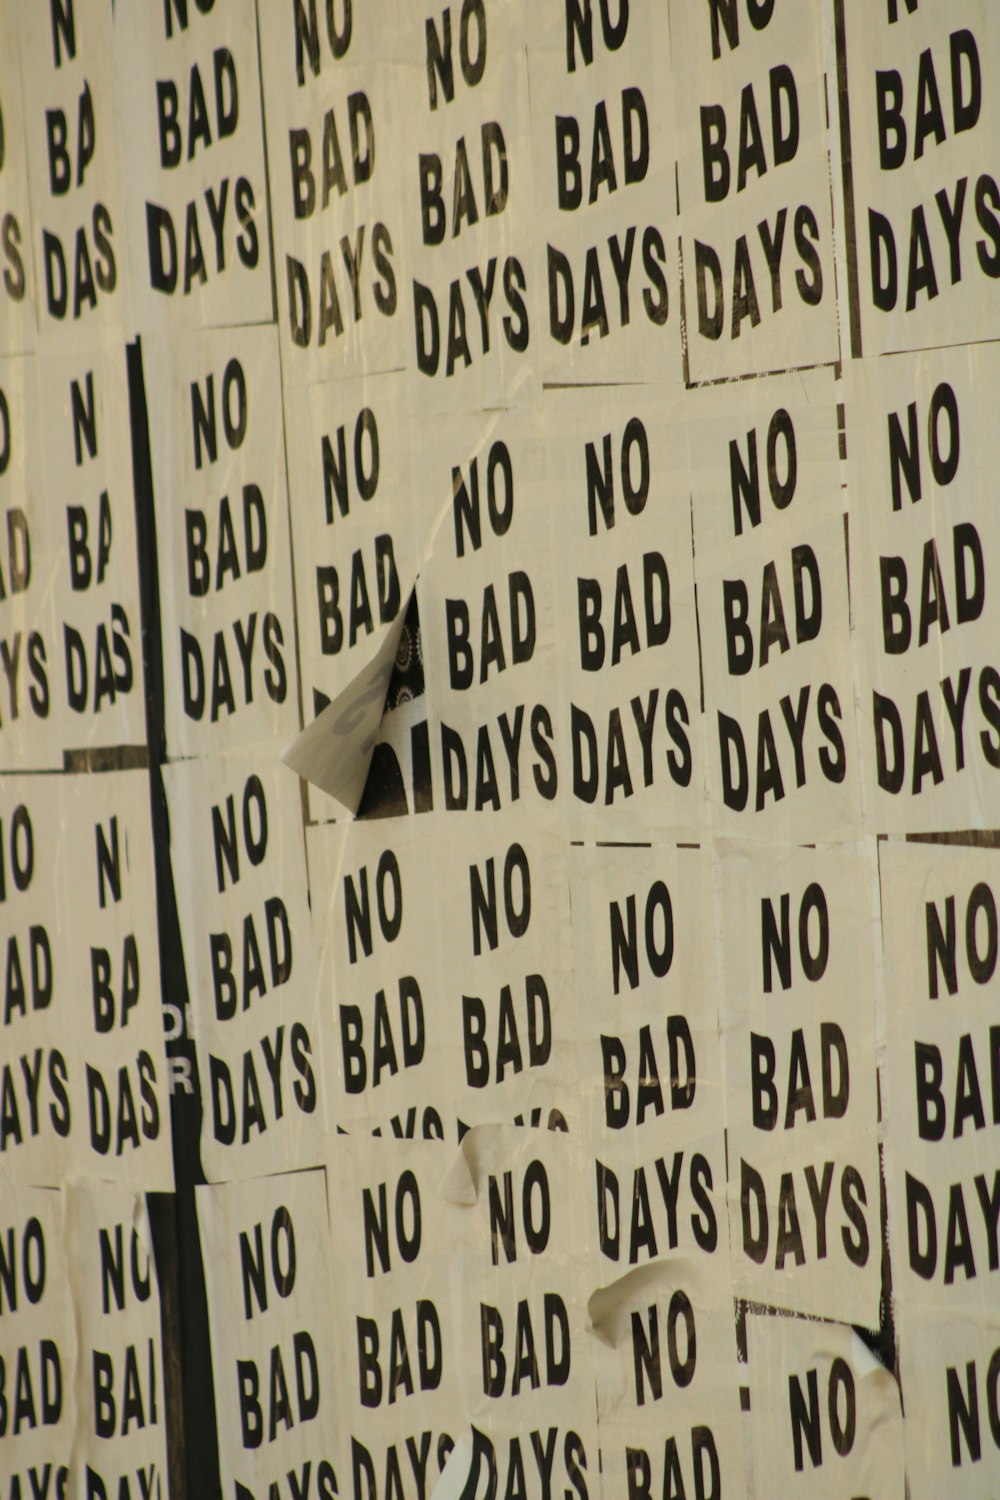 a bunch of signs that say no bad days and no bad days